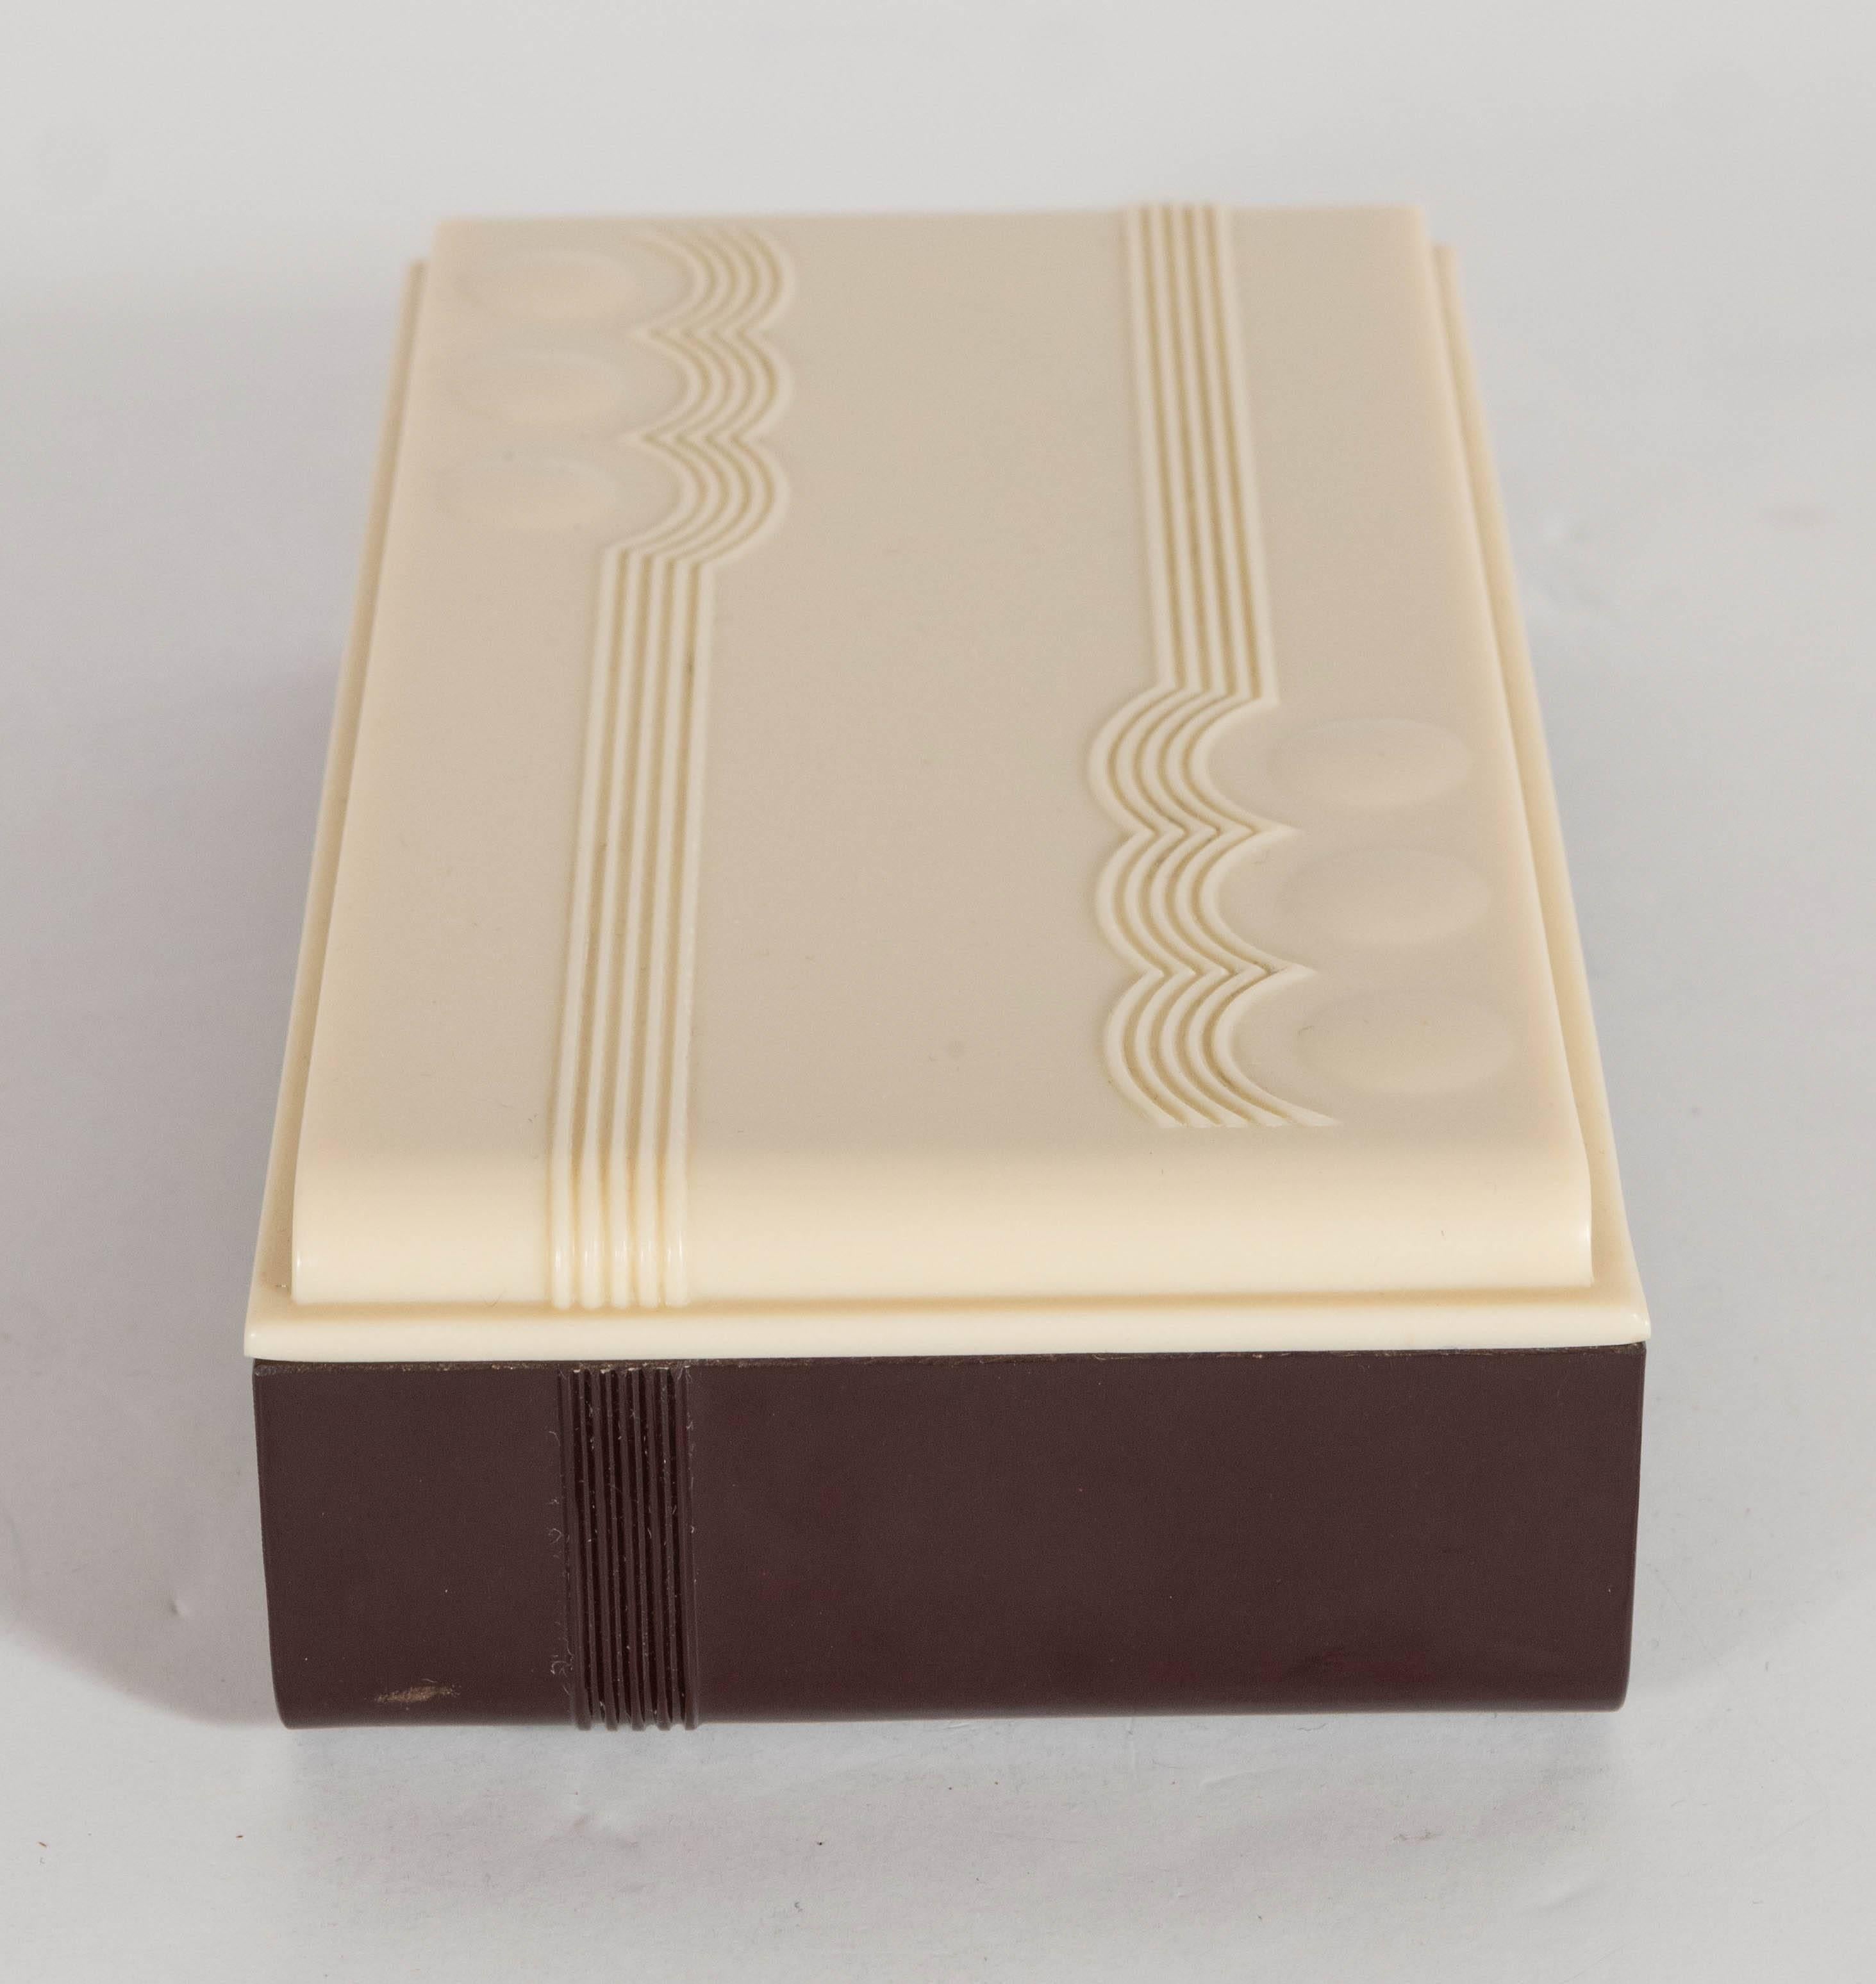 Mid-20th Century American Art Deco Two-Tone Bakelite Box with Detailing by Parker Box Company